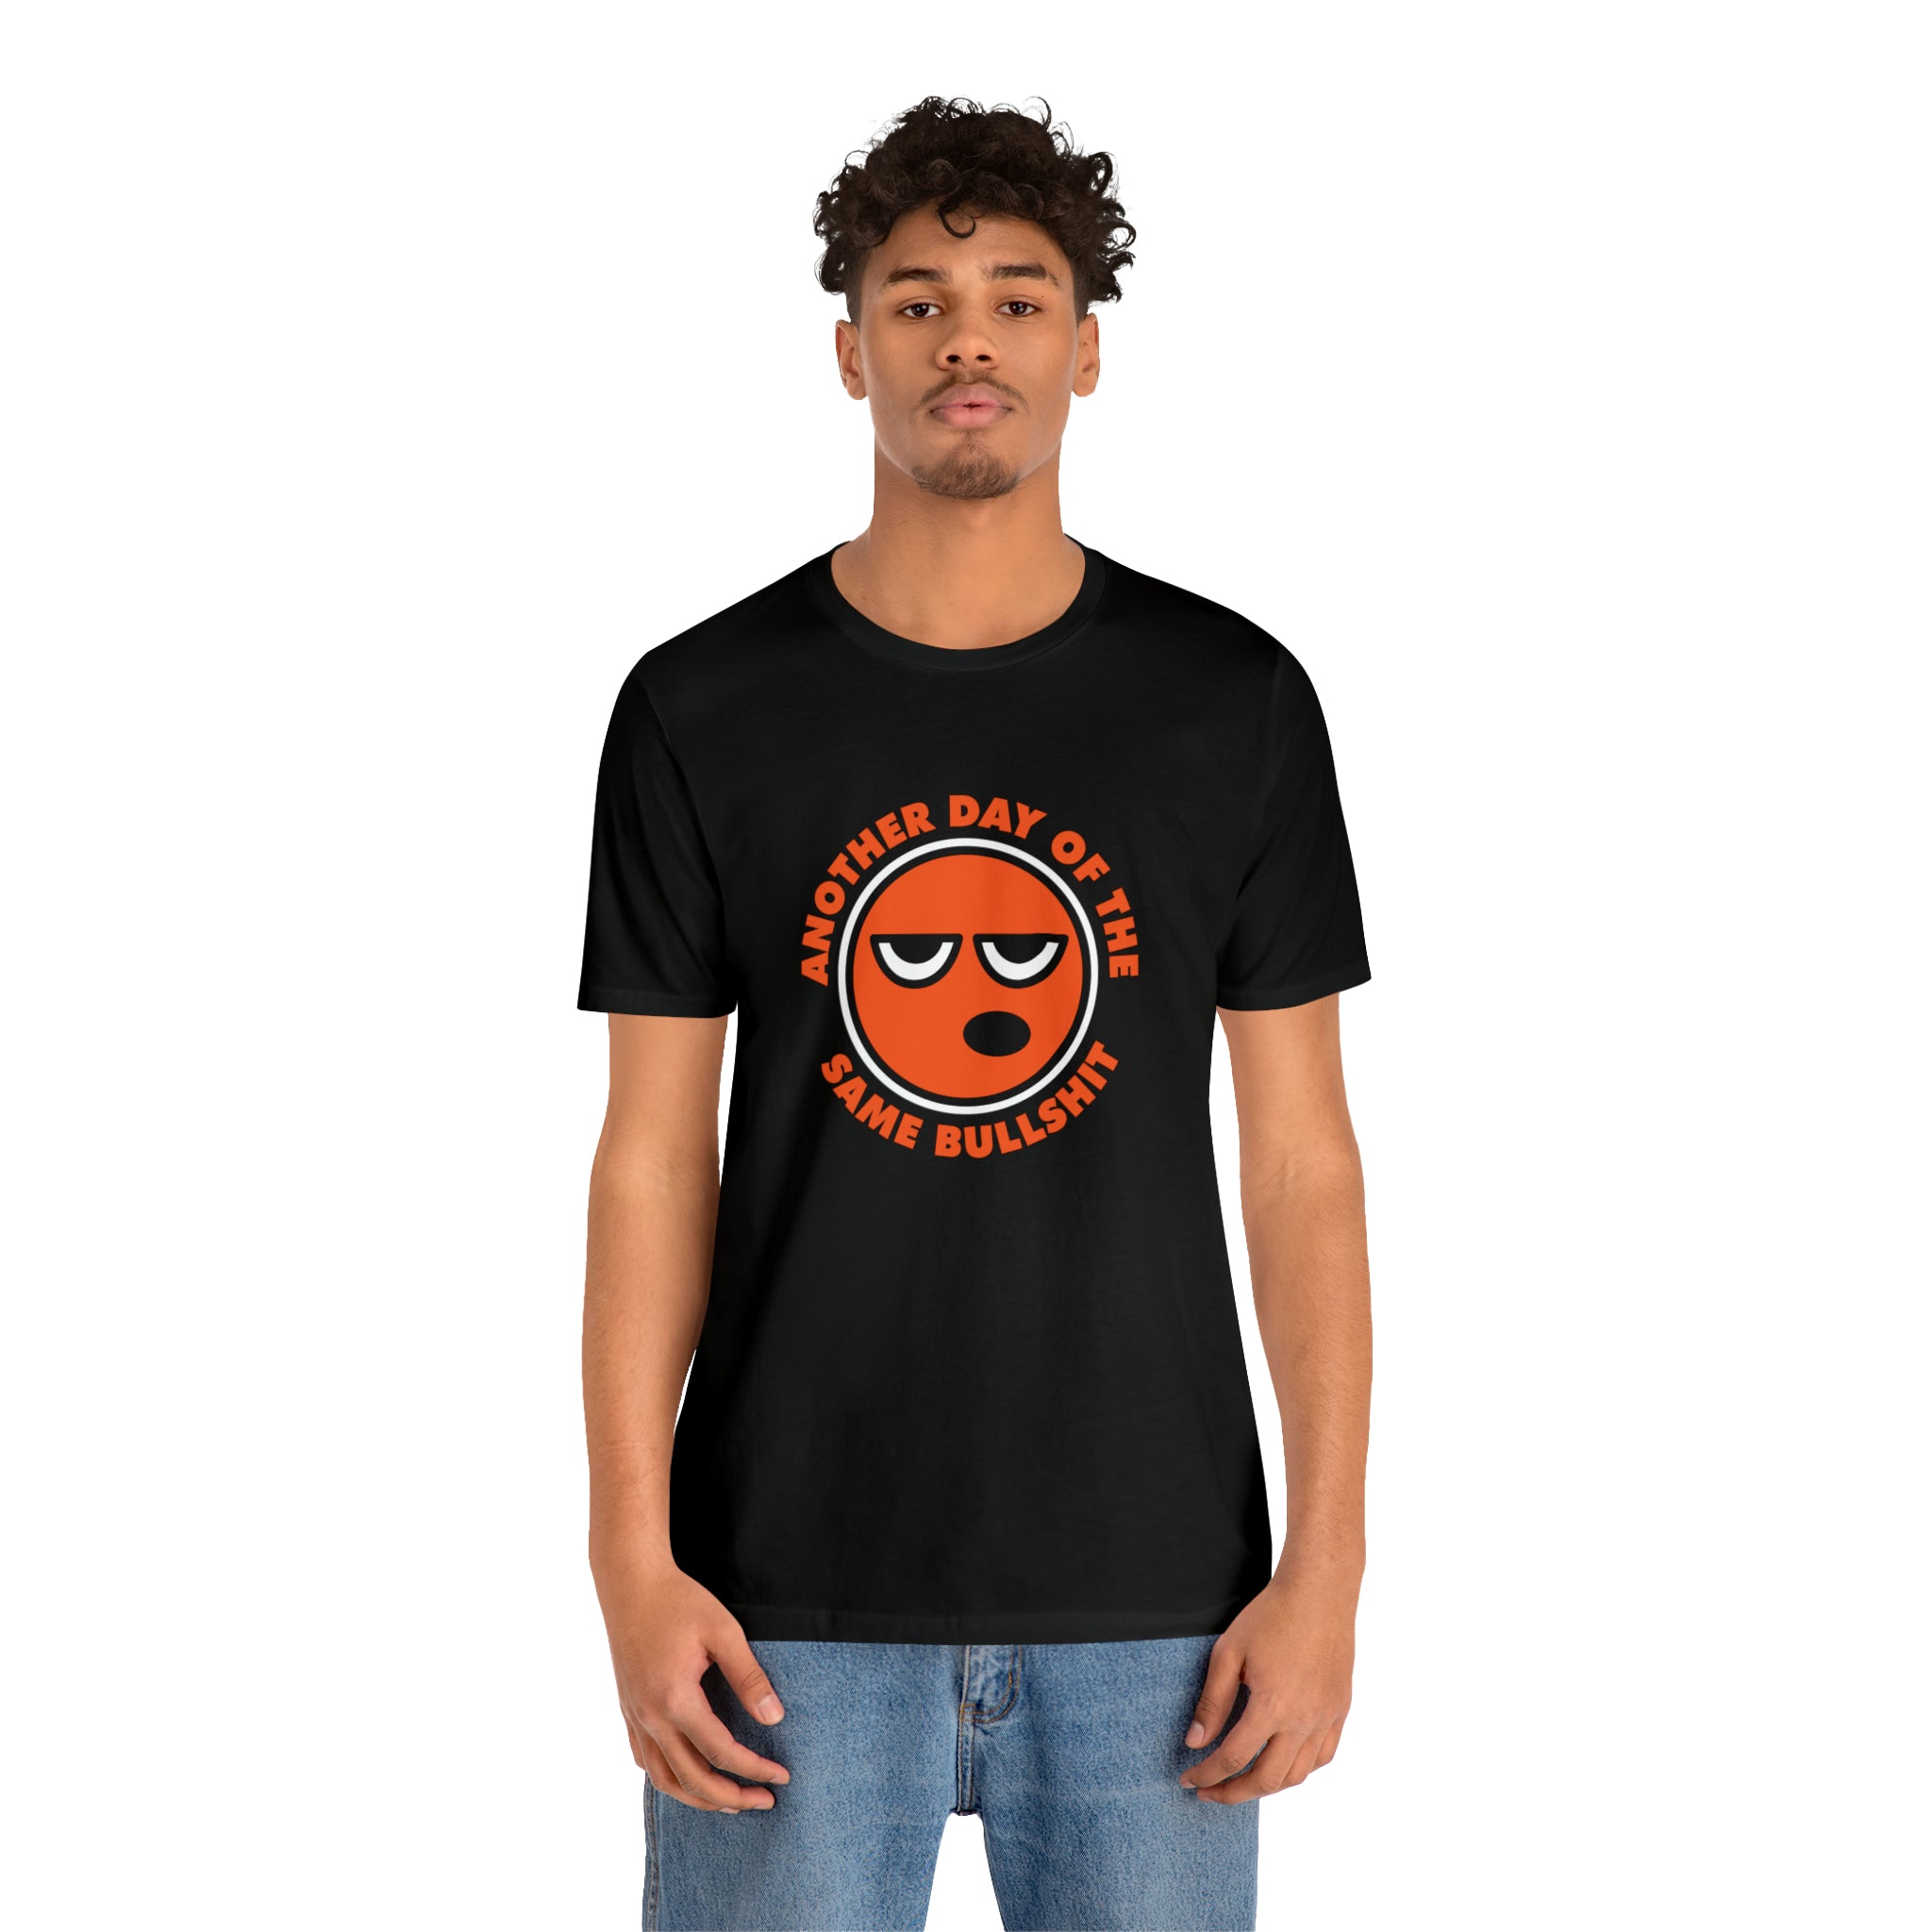 A man in an "Another Day of the Same Bullshit" t-shirt with a cartoon face design.